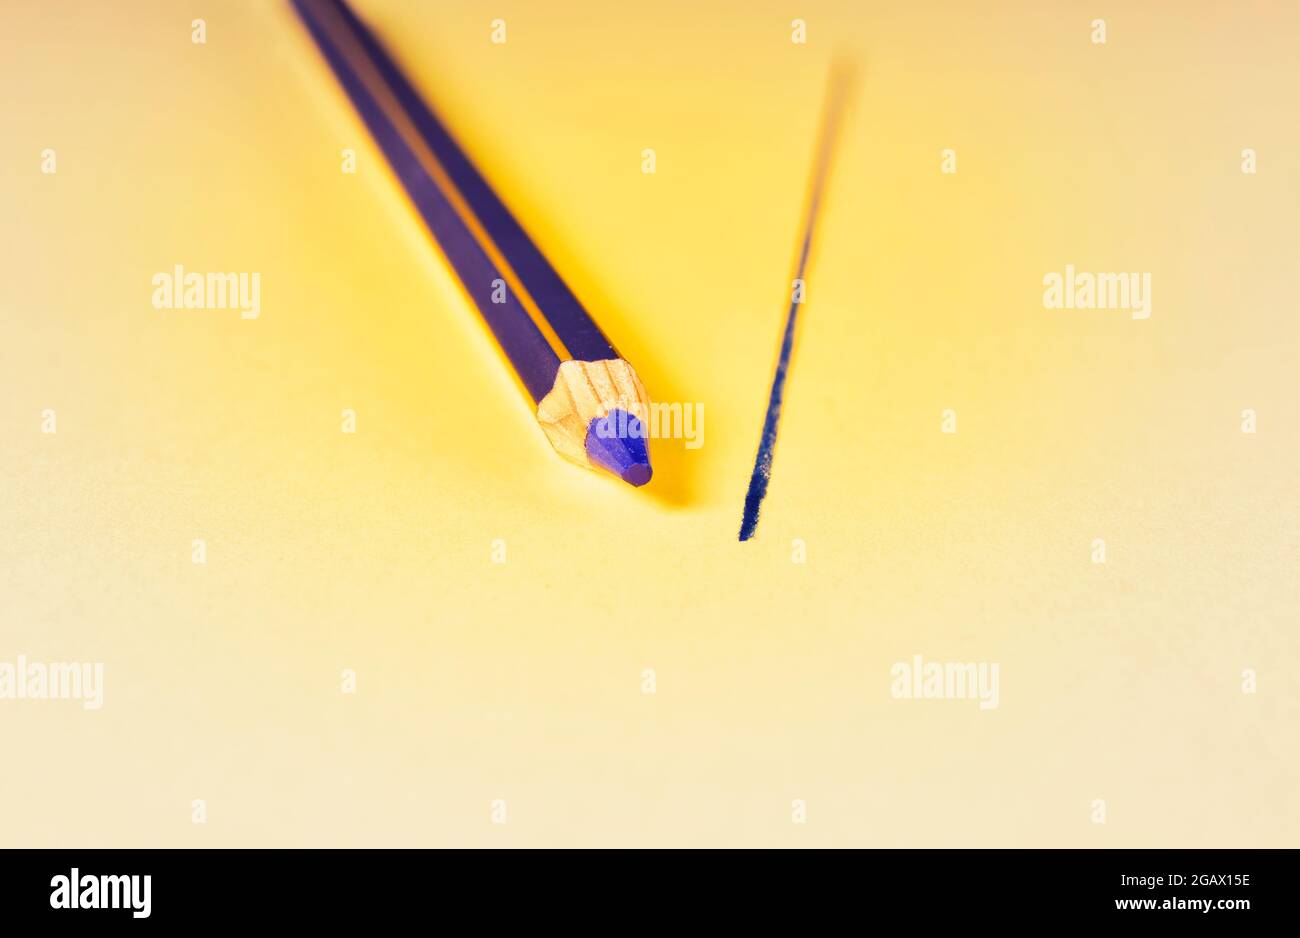 One blue wooden pencil and blue line on yellow background Stock Photo